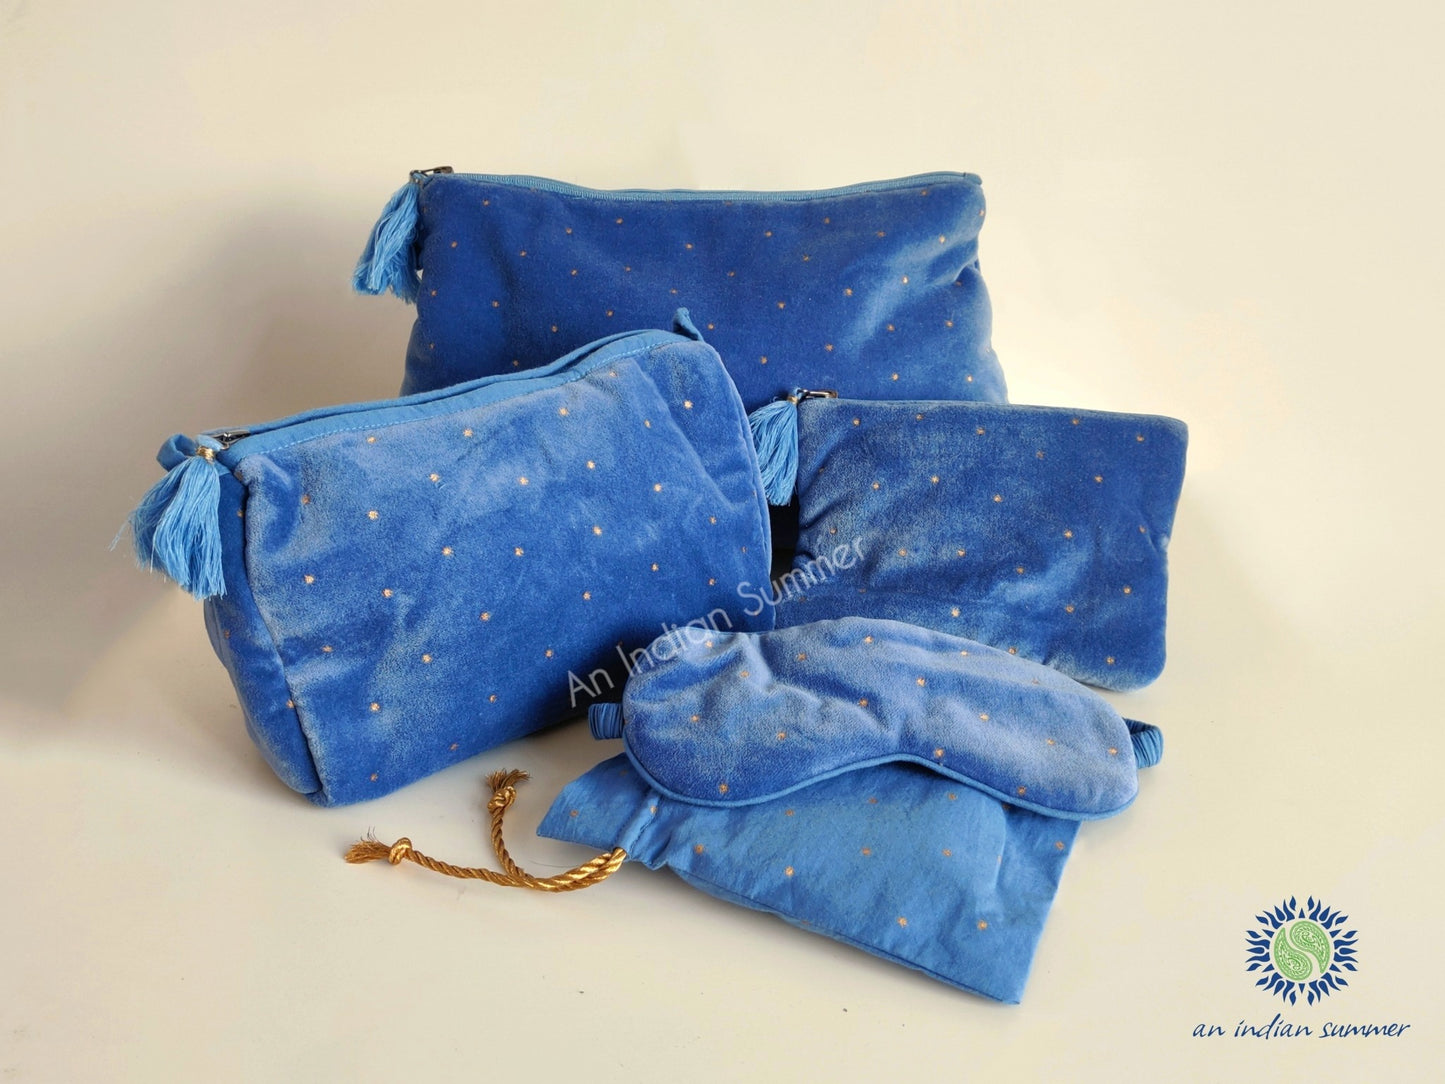 Velvet Pouches | Powder Blue with Gold Stars | Cotton Velvet | An Indian Summer | Seasonless Timeless Sustainable Ethical Authentic Artisan Conscious Clothing Lifestyle Brand